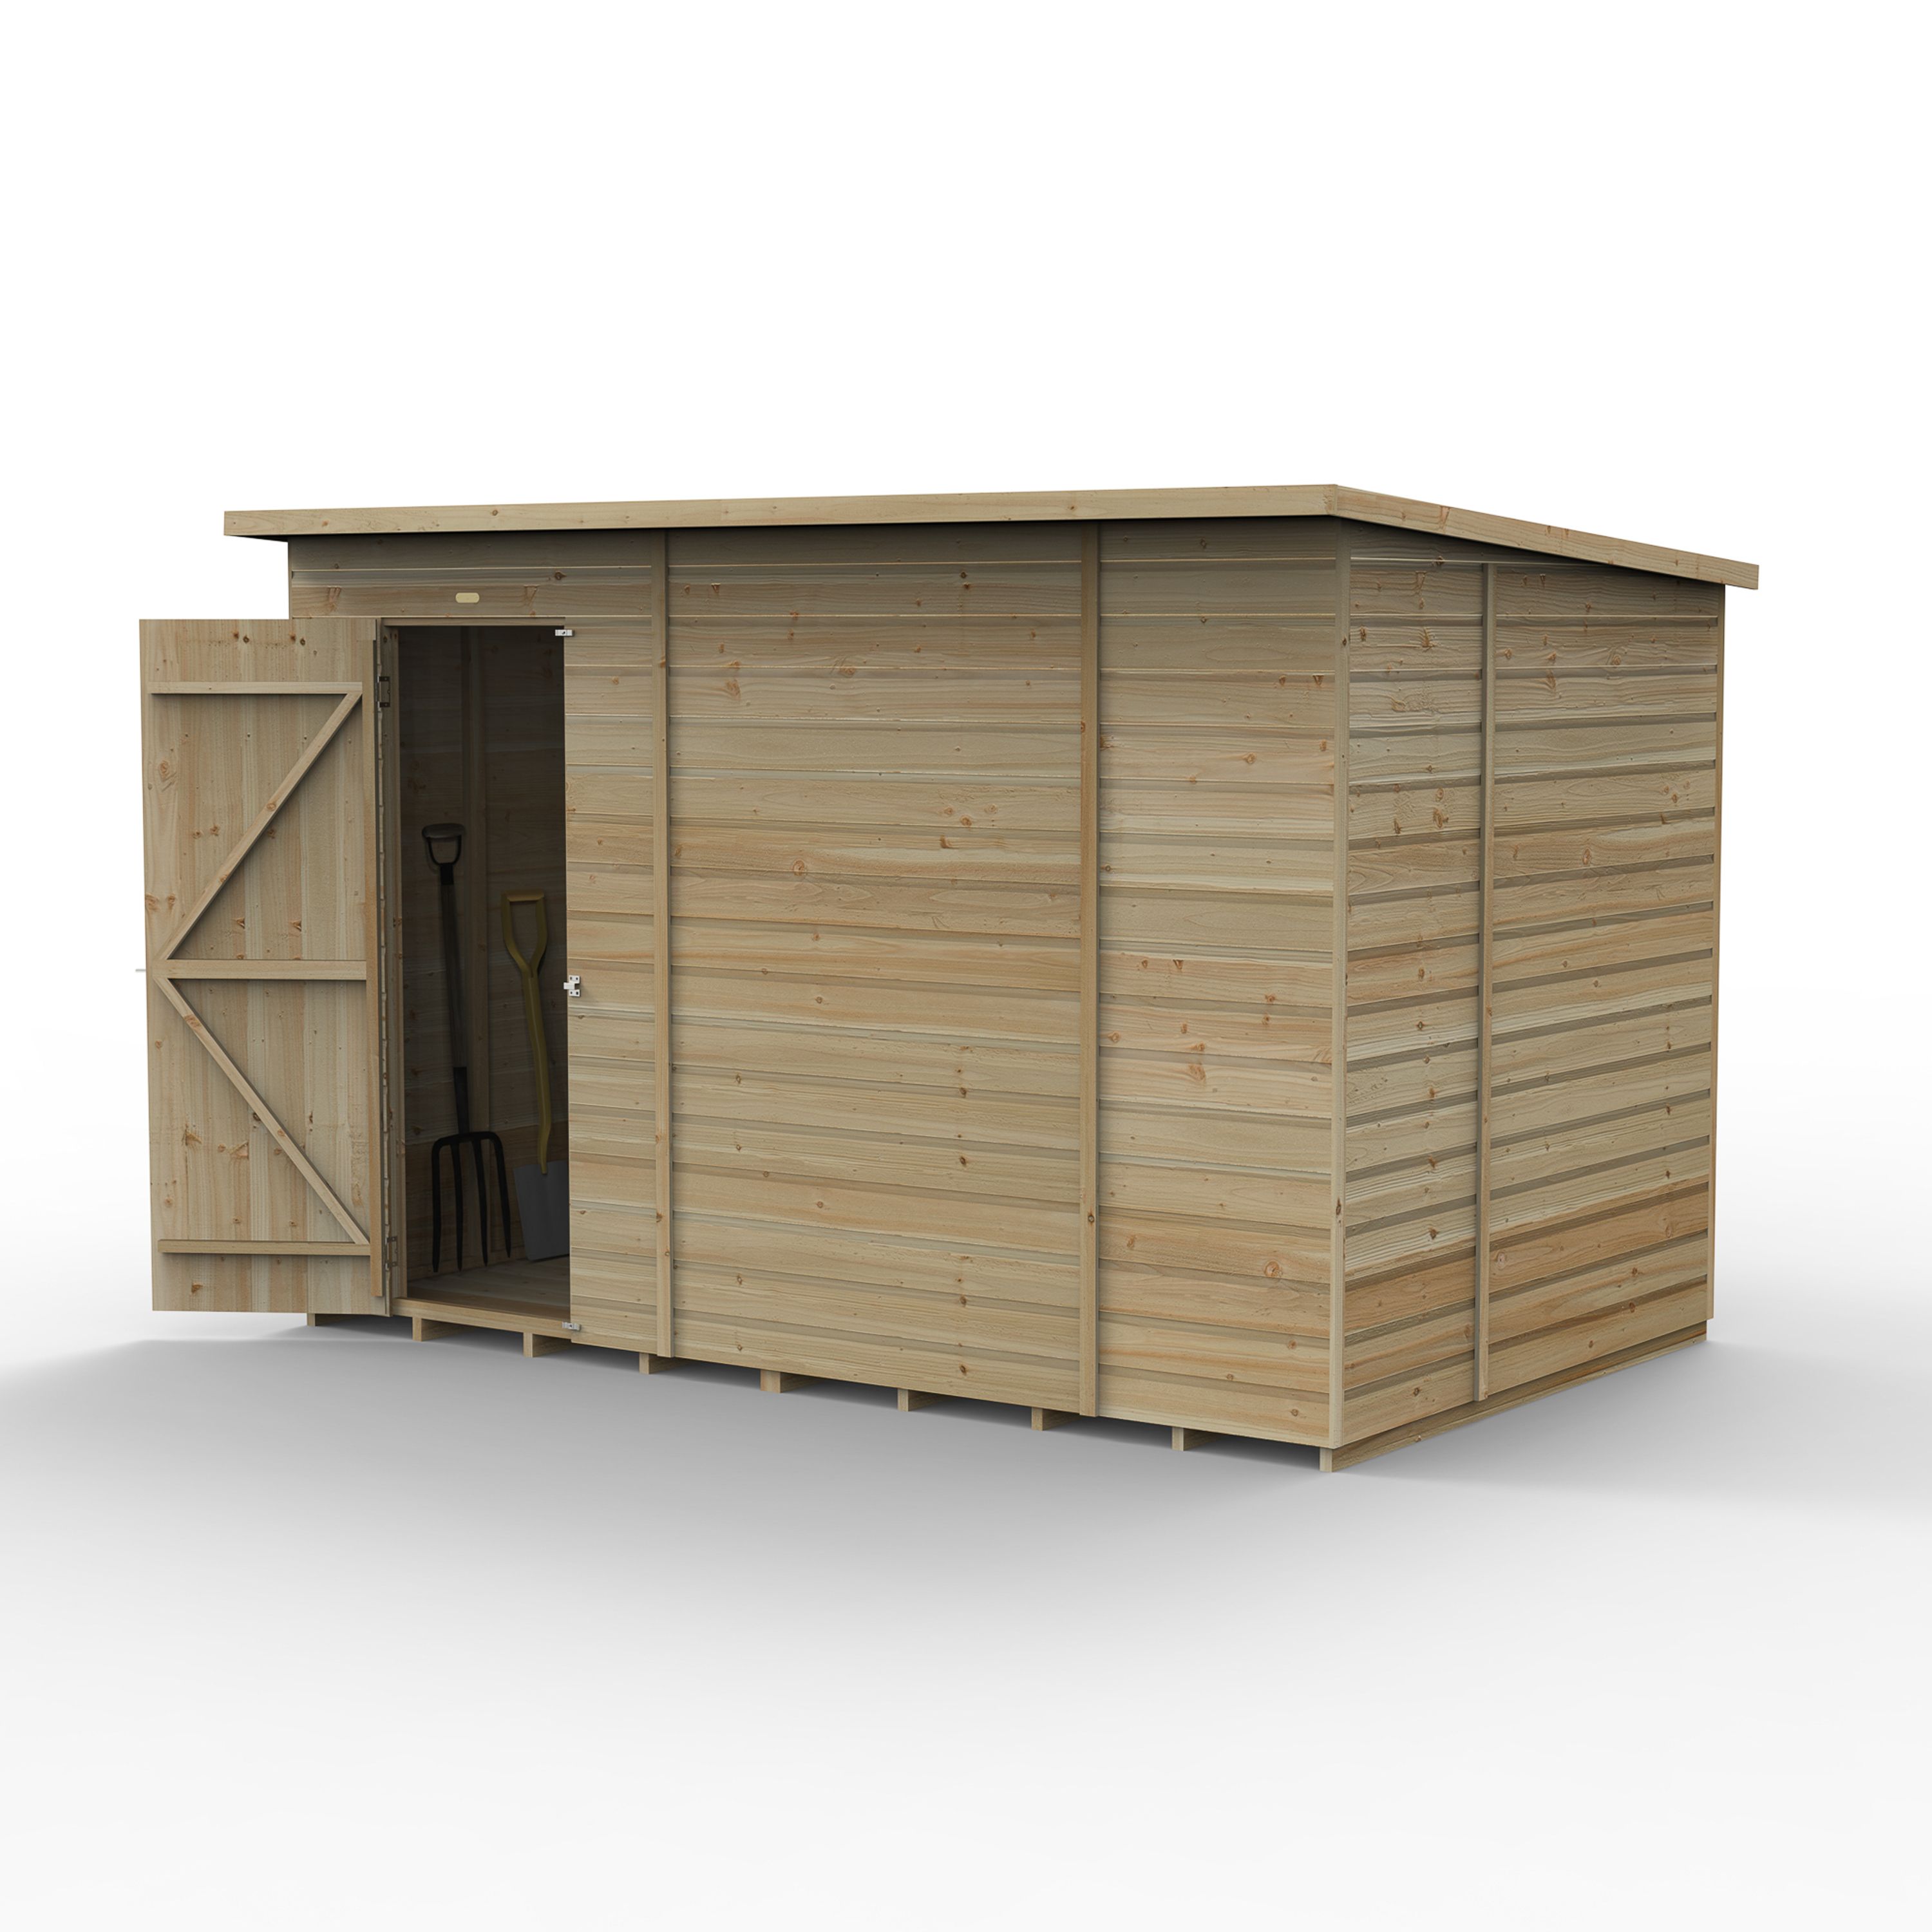 Forest Garden Beckwood 10x6 ft Pent Natural timber Wooden 2 door Shed with floor - Assembly not required